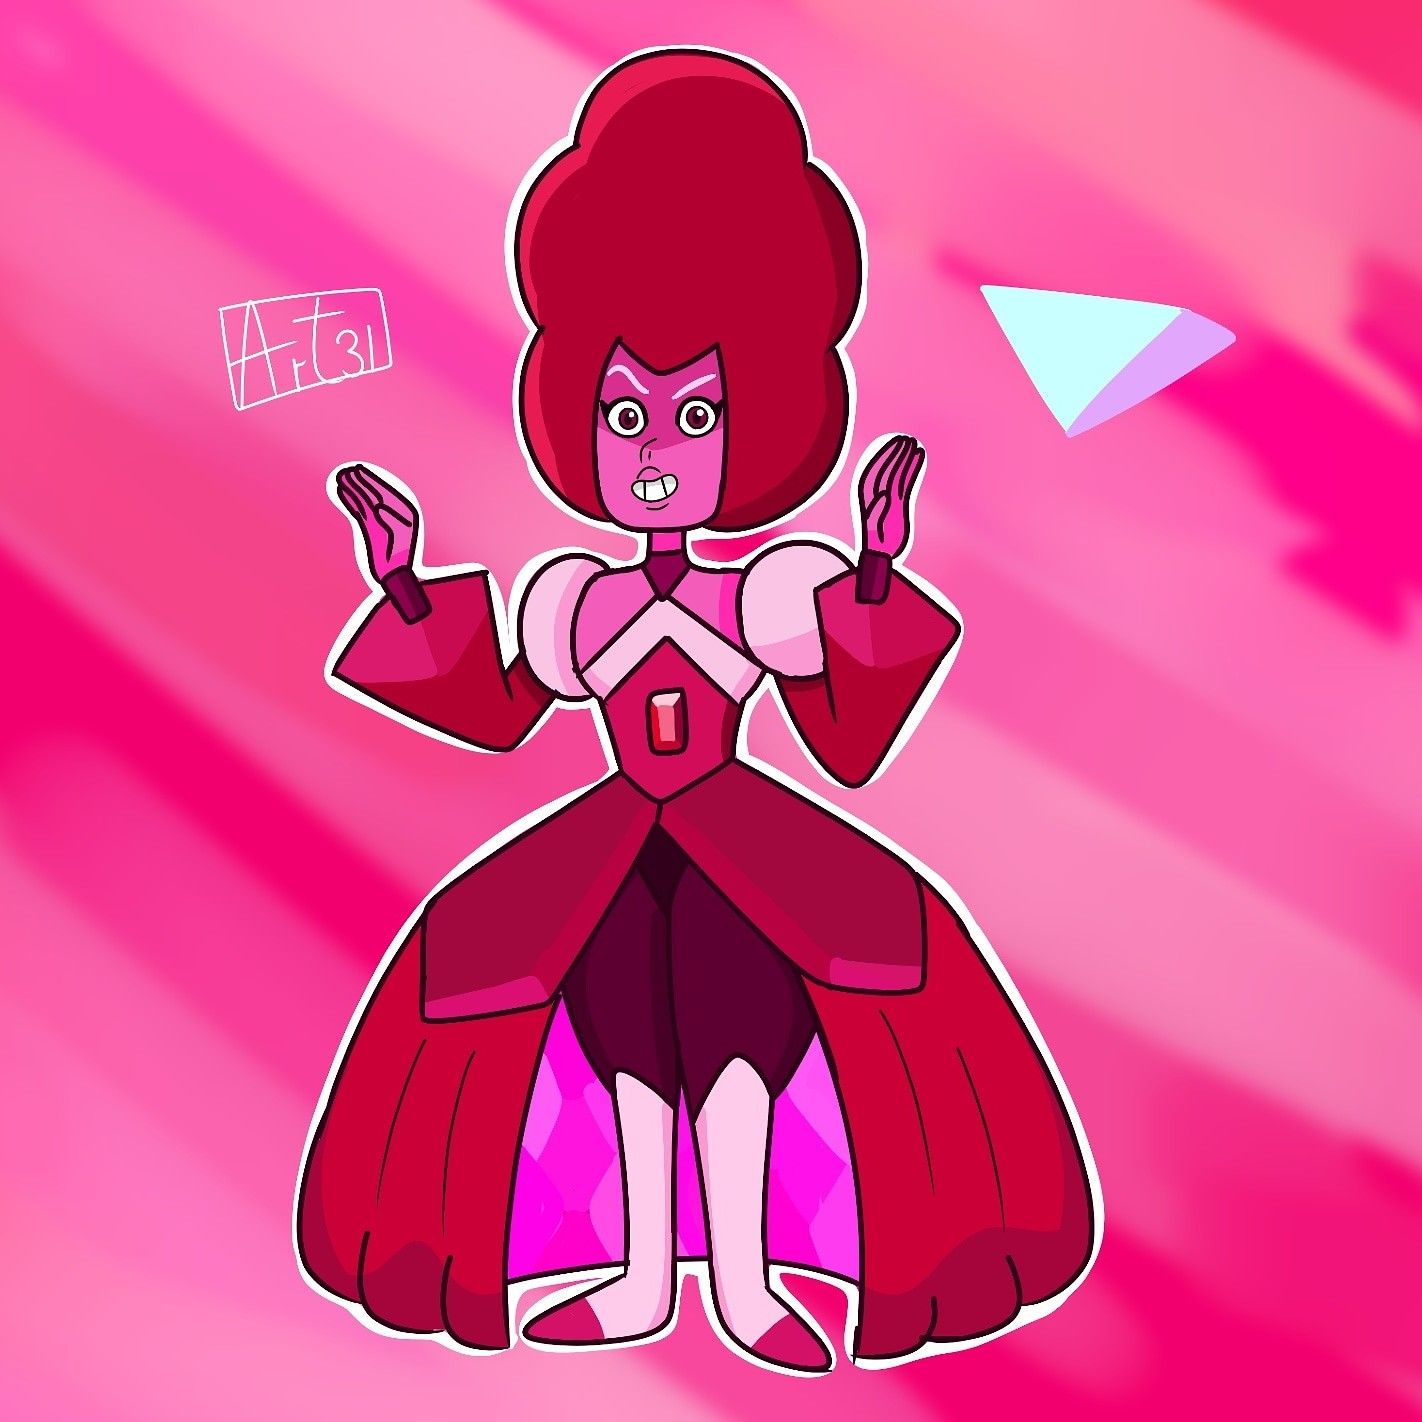 Pyrope. Steven universe, Photo and video, Universe